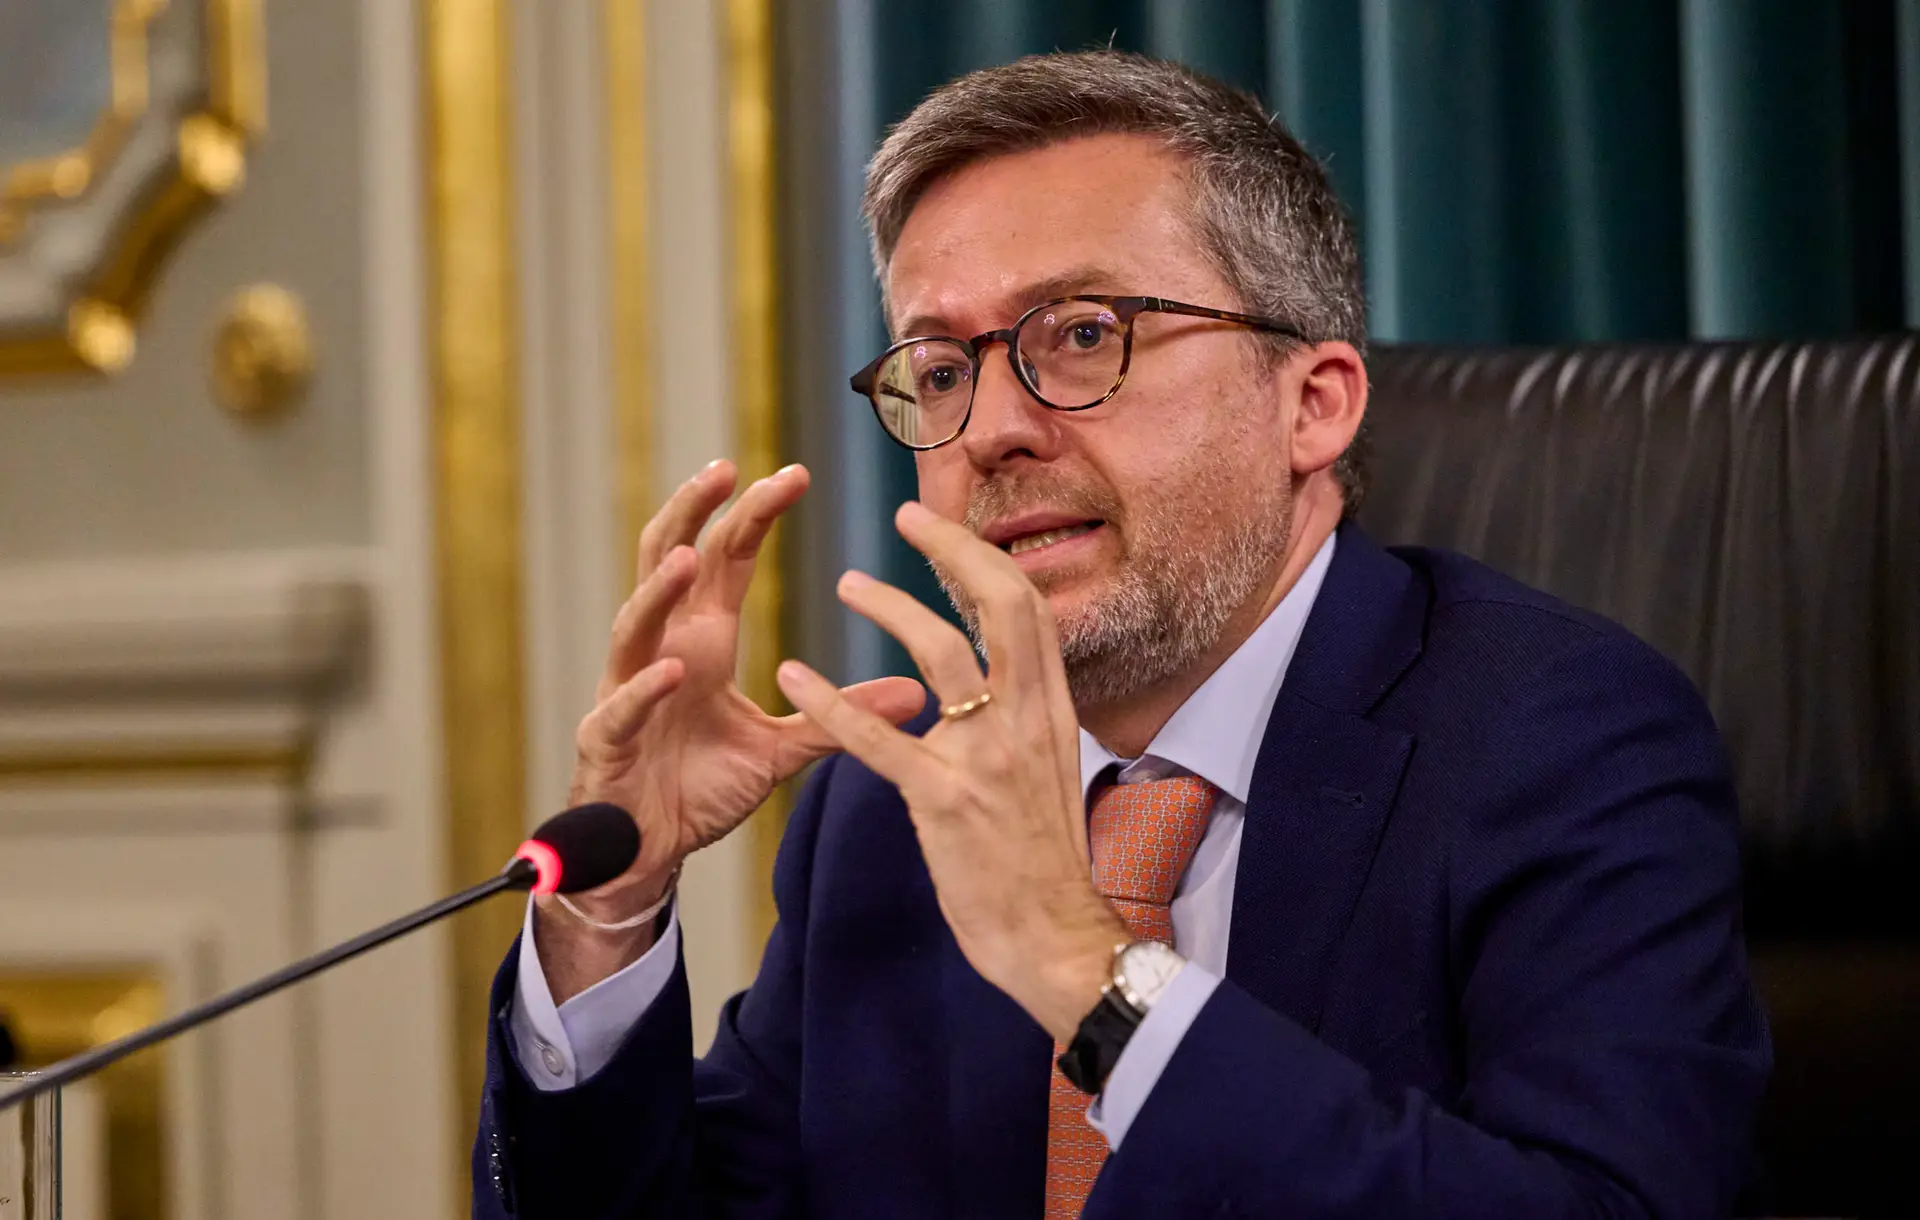 LISBON, PORTUGAL – NOVEMBER 29: Lisbon Mayor Carlos Moedas gestures while making a point during his first meeting with members of the Associação Da Imprensa Estrangeira Em Portugal AIEP (Foreign Press Association) in City Hall on November 29, 2021 in Lisbon, Portugal. Former Portuguese Parliamentarian and European Commissioner for Research, Science and Innovation Carlos Moedas became the 78th Lisbon Mayor on October 18, 2021, after being elected while contending for the Social Democratic Party PSD on September 26, 2021. (Photo by Horacio Villalobos#Corbis/Corbis via Getty Images)